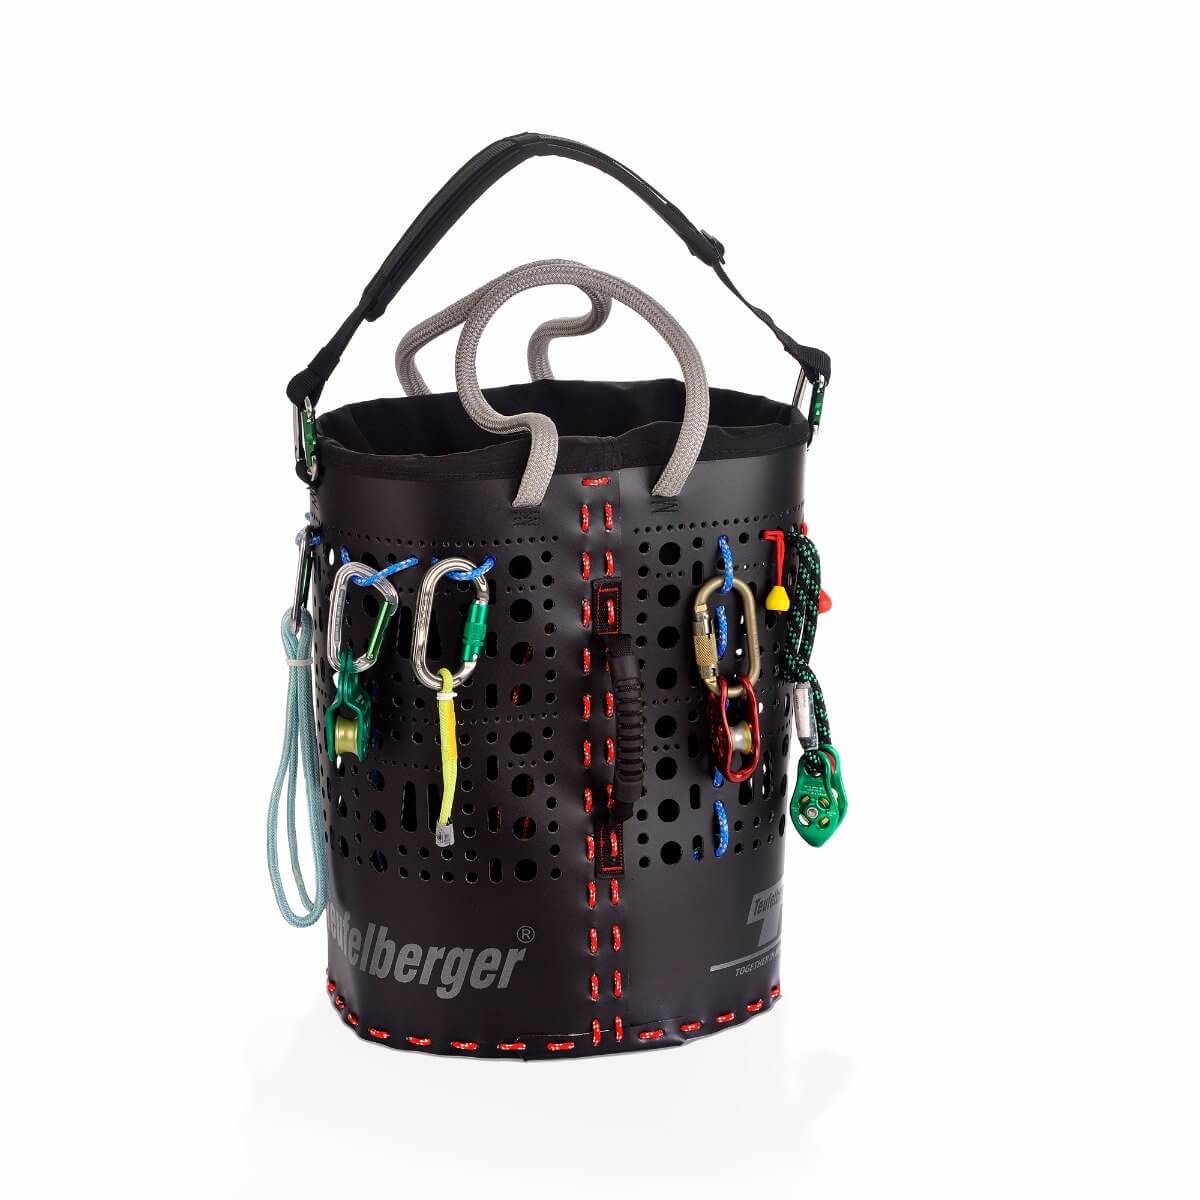 Tool@rrest Tool Bucket Bag with Lifting Rope and Scaffold Hook 